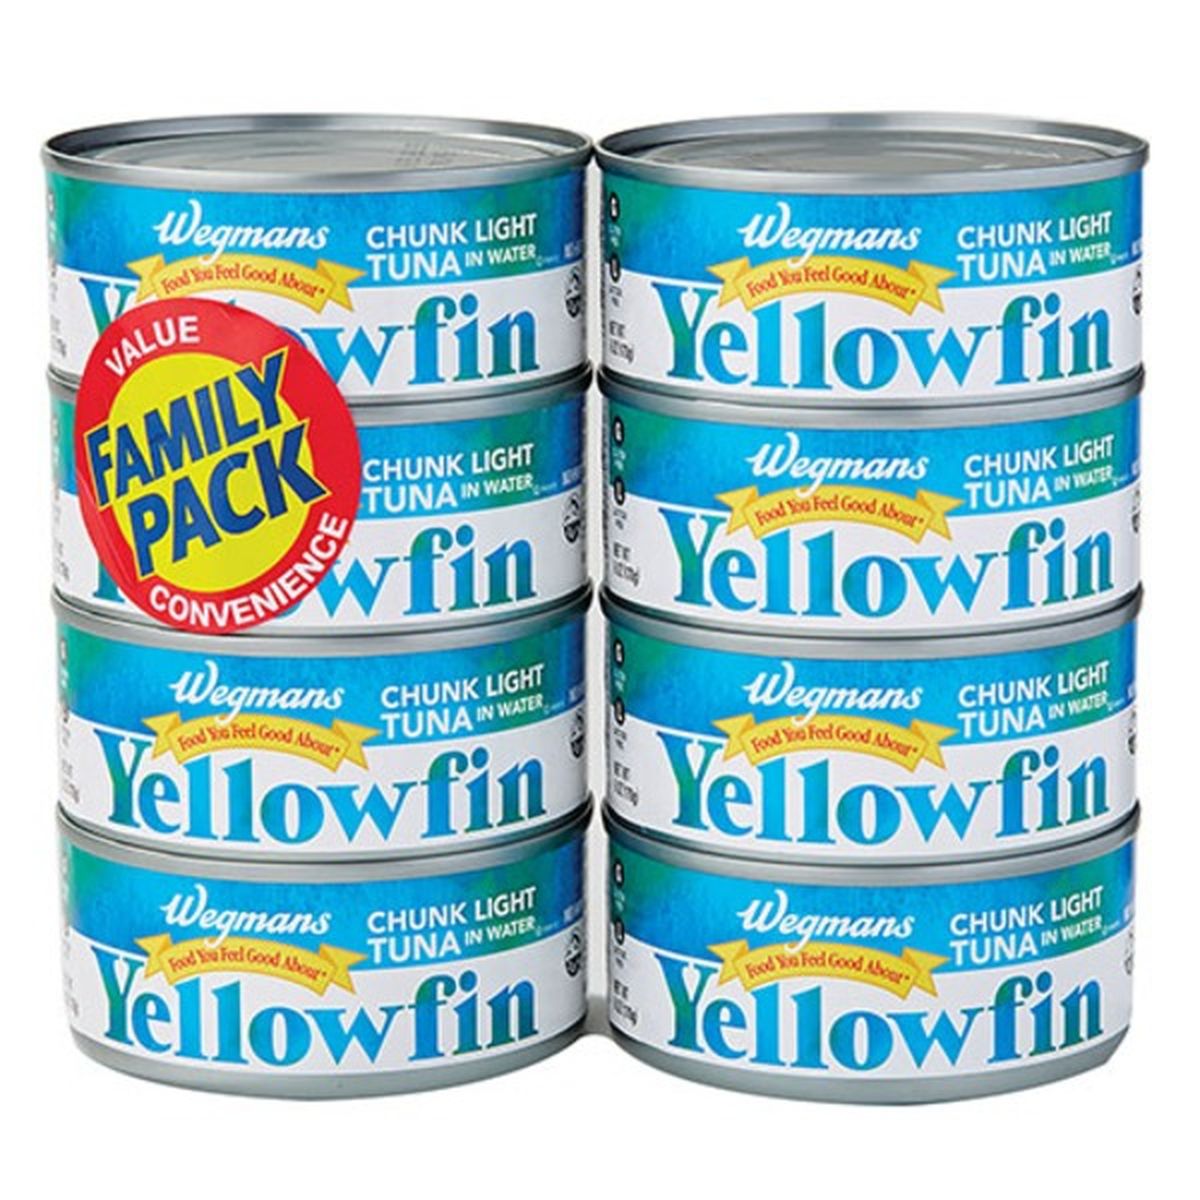 Calories in Wegmans Chunk Light Yellowfin Tuna in Water, 8 PACK, FAMILY PACK